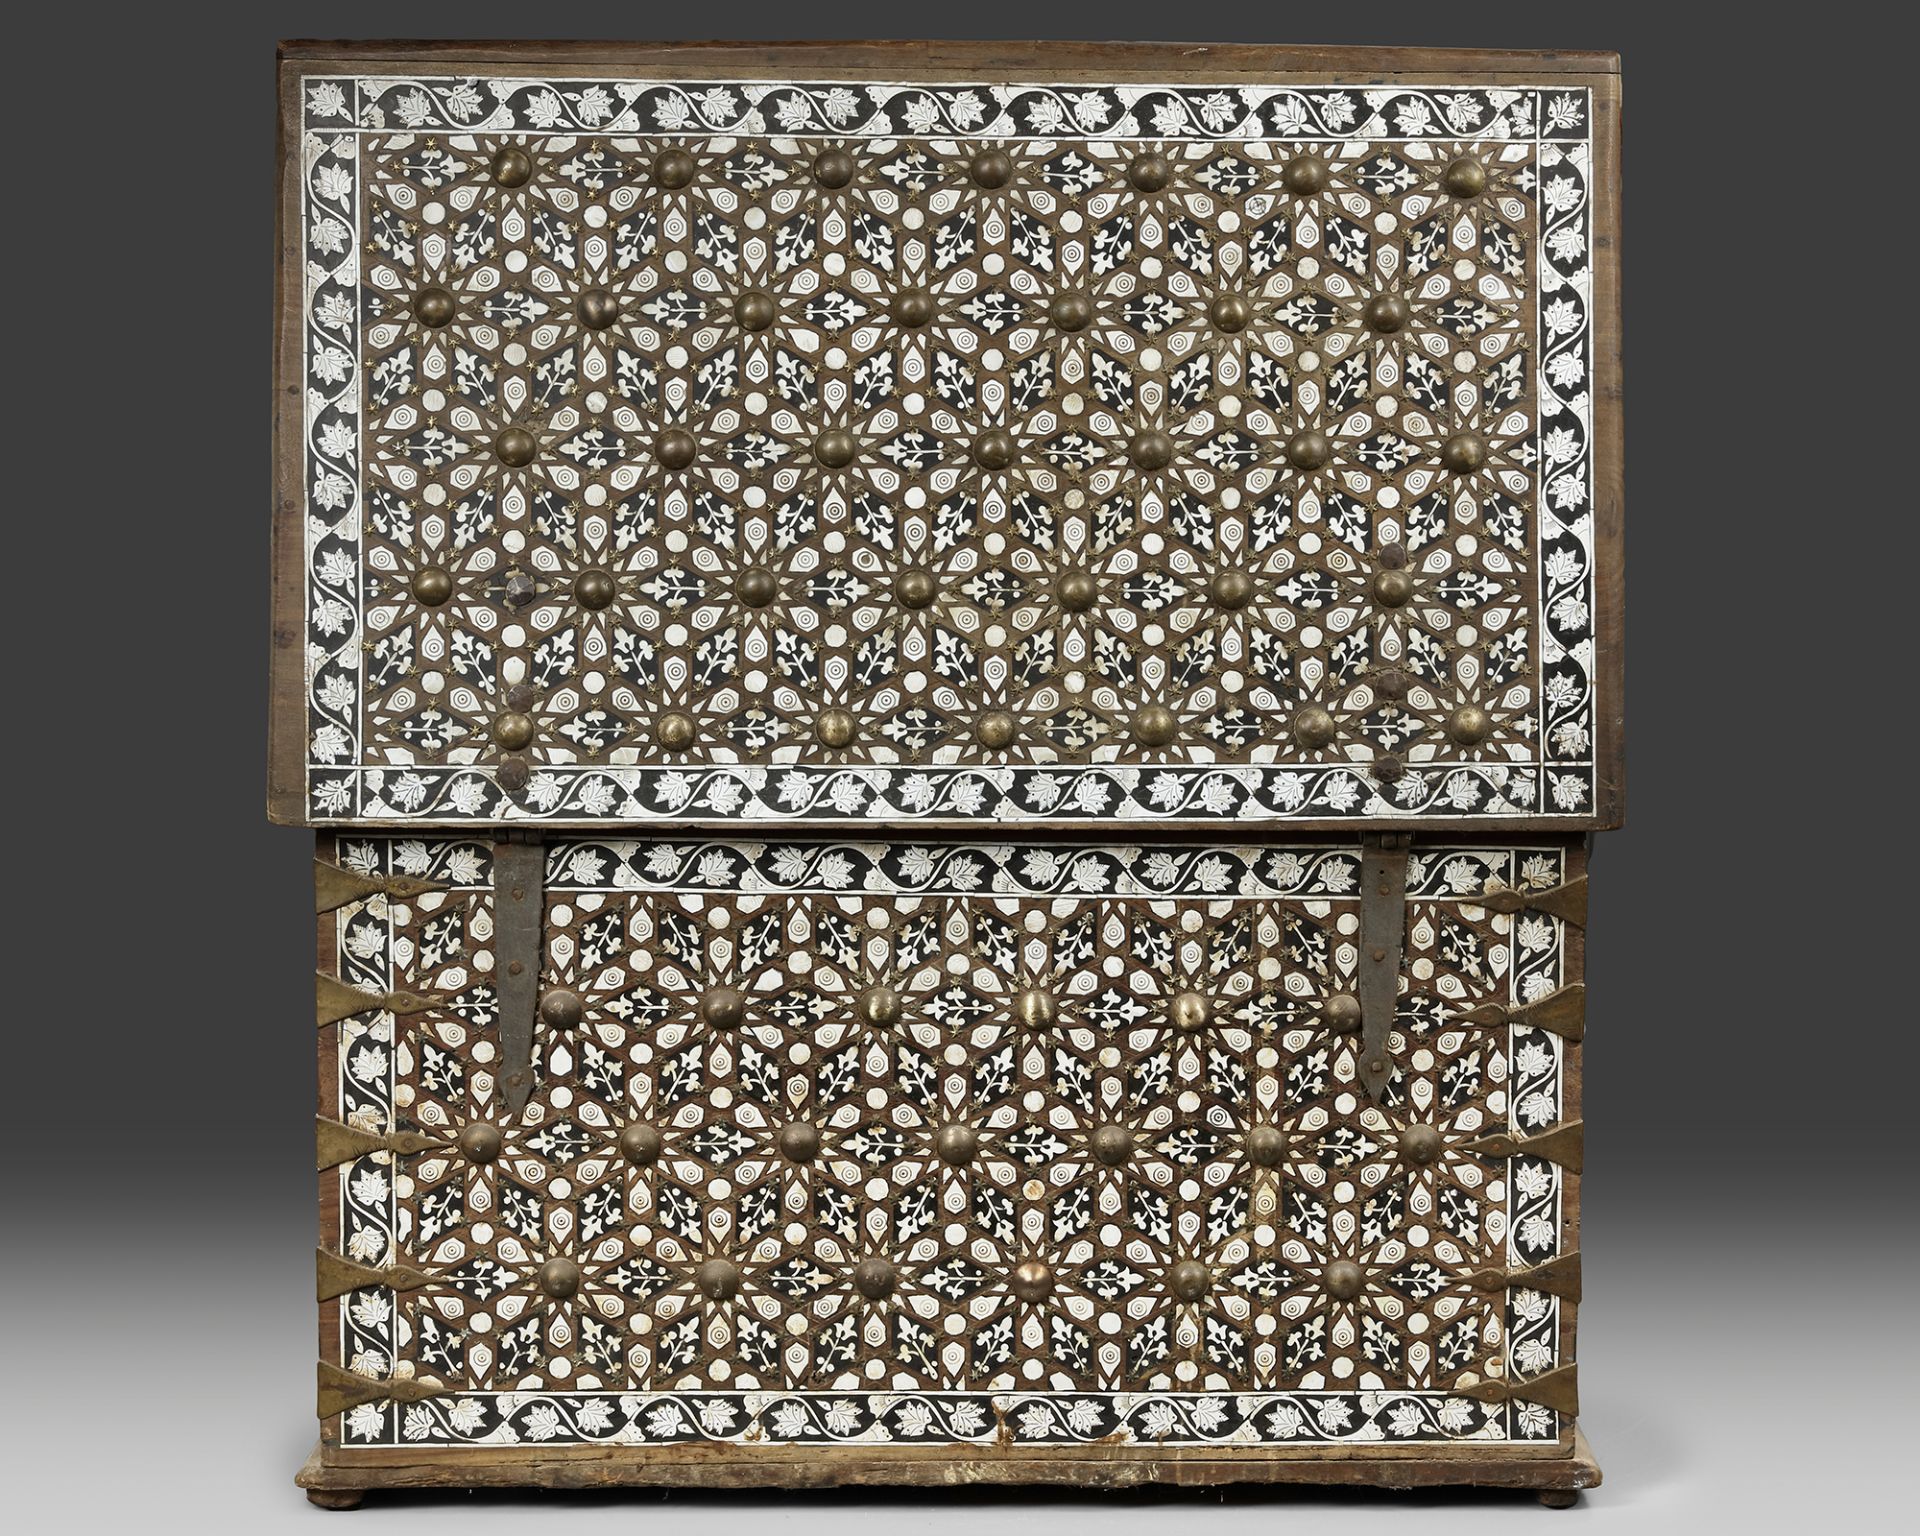 A LARGE OTTOMAN BONE INLAID WOODEN CHEST, SYRIA, LATE 19TH-EARLY 20TH CENTURY - Bild 5 aus 5